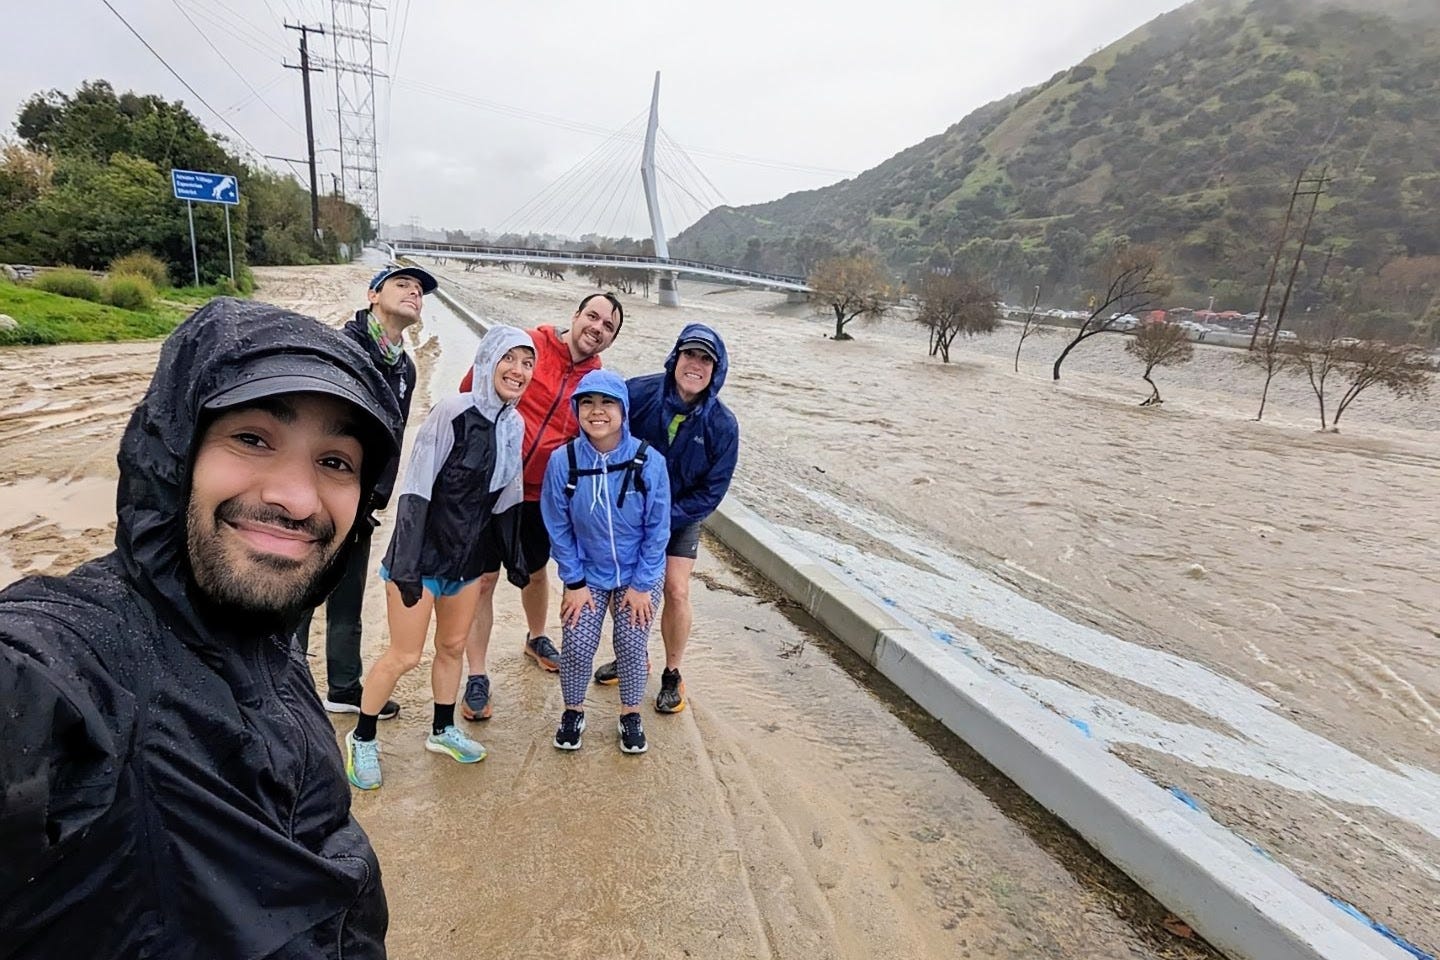 Me and the Glendale Runners posing for a wet but very safe photo on the banks of a bulging L.A. River